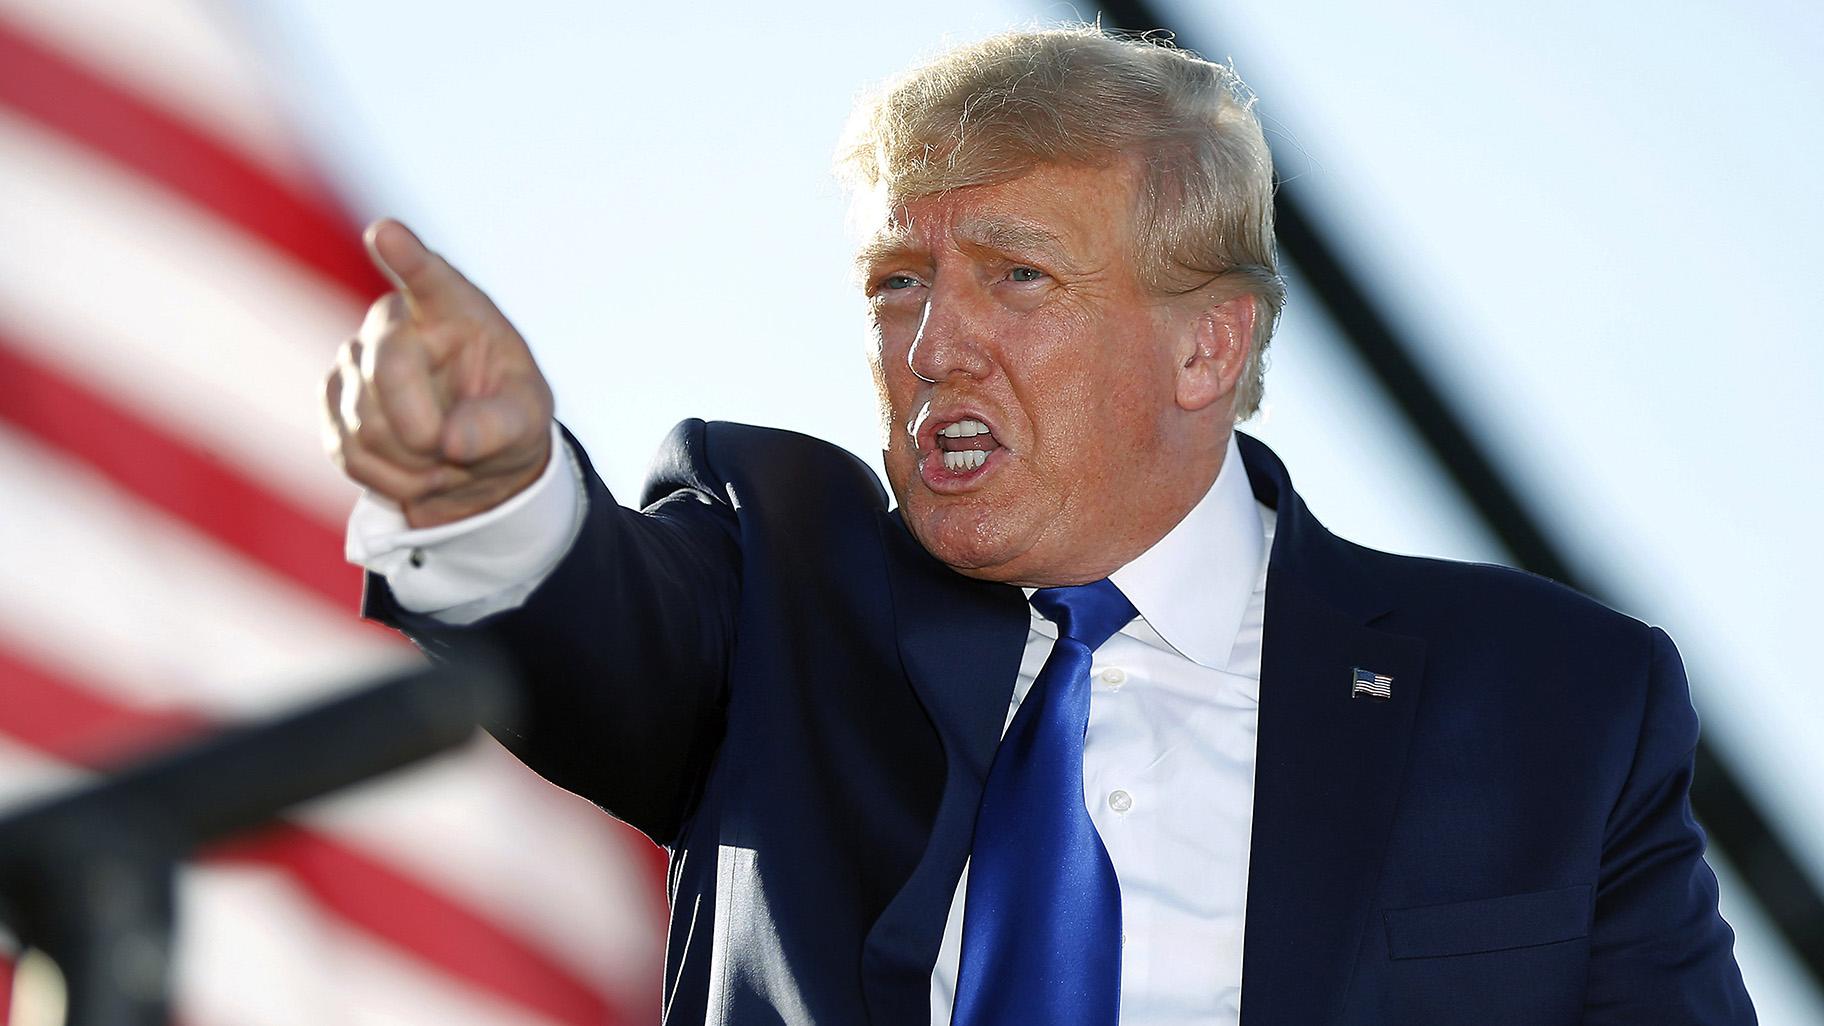 Former President Donald Trump speaks at a rally at the Delaware County Fairgrounds, April 23, 2022, in Delaware, Ohio. (AP Photo / Joe Maiorana, File)